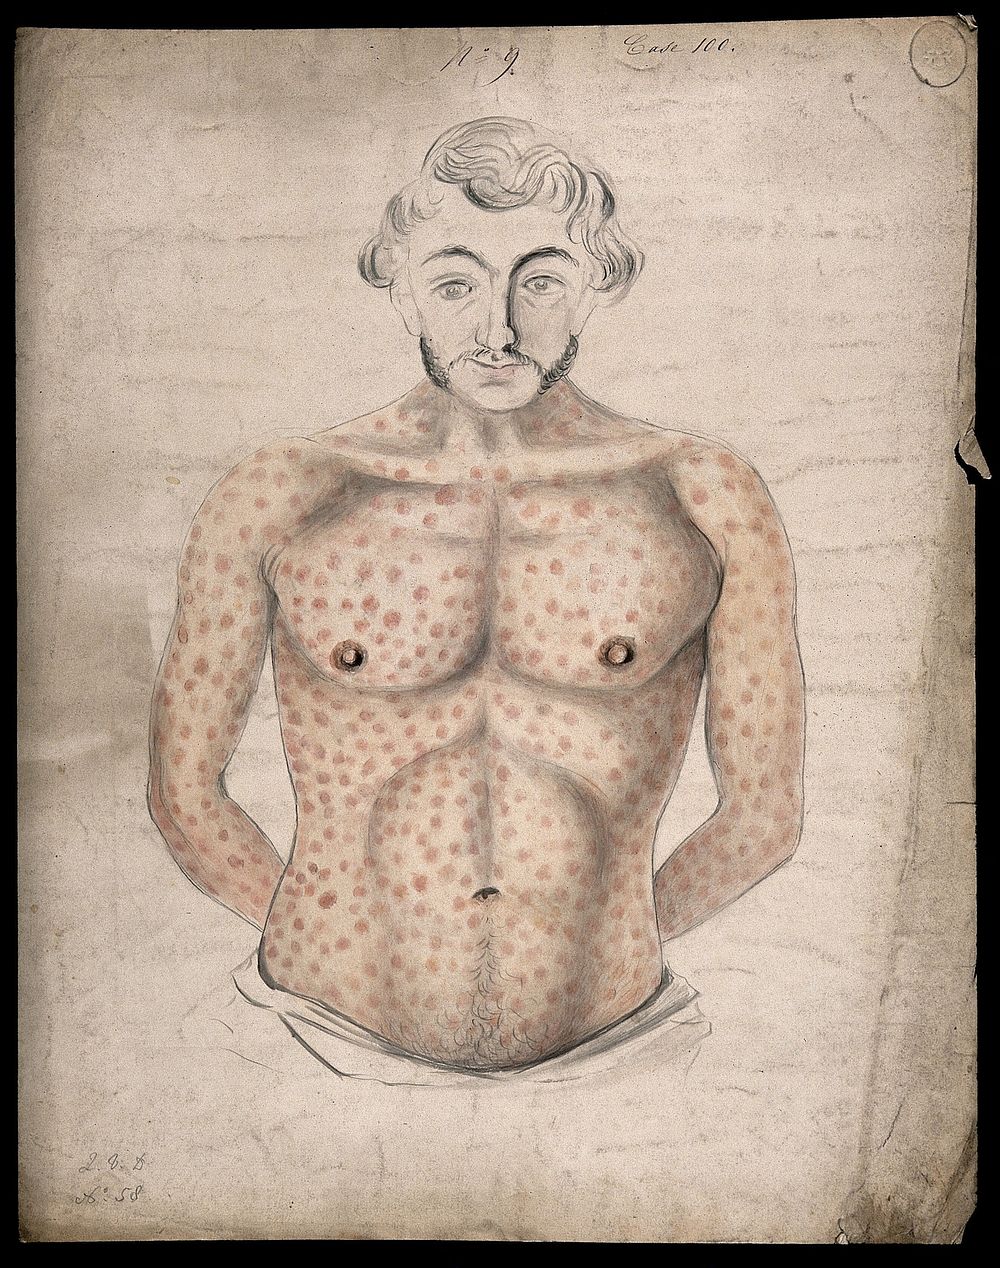 The torso and arms of a man suffering from a rash of sores. Watercolour by C. D'Alton, 1856.